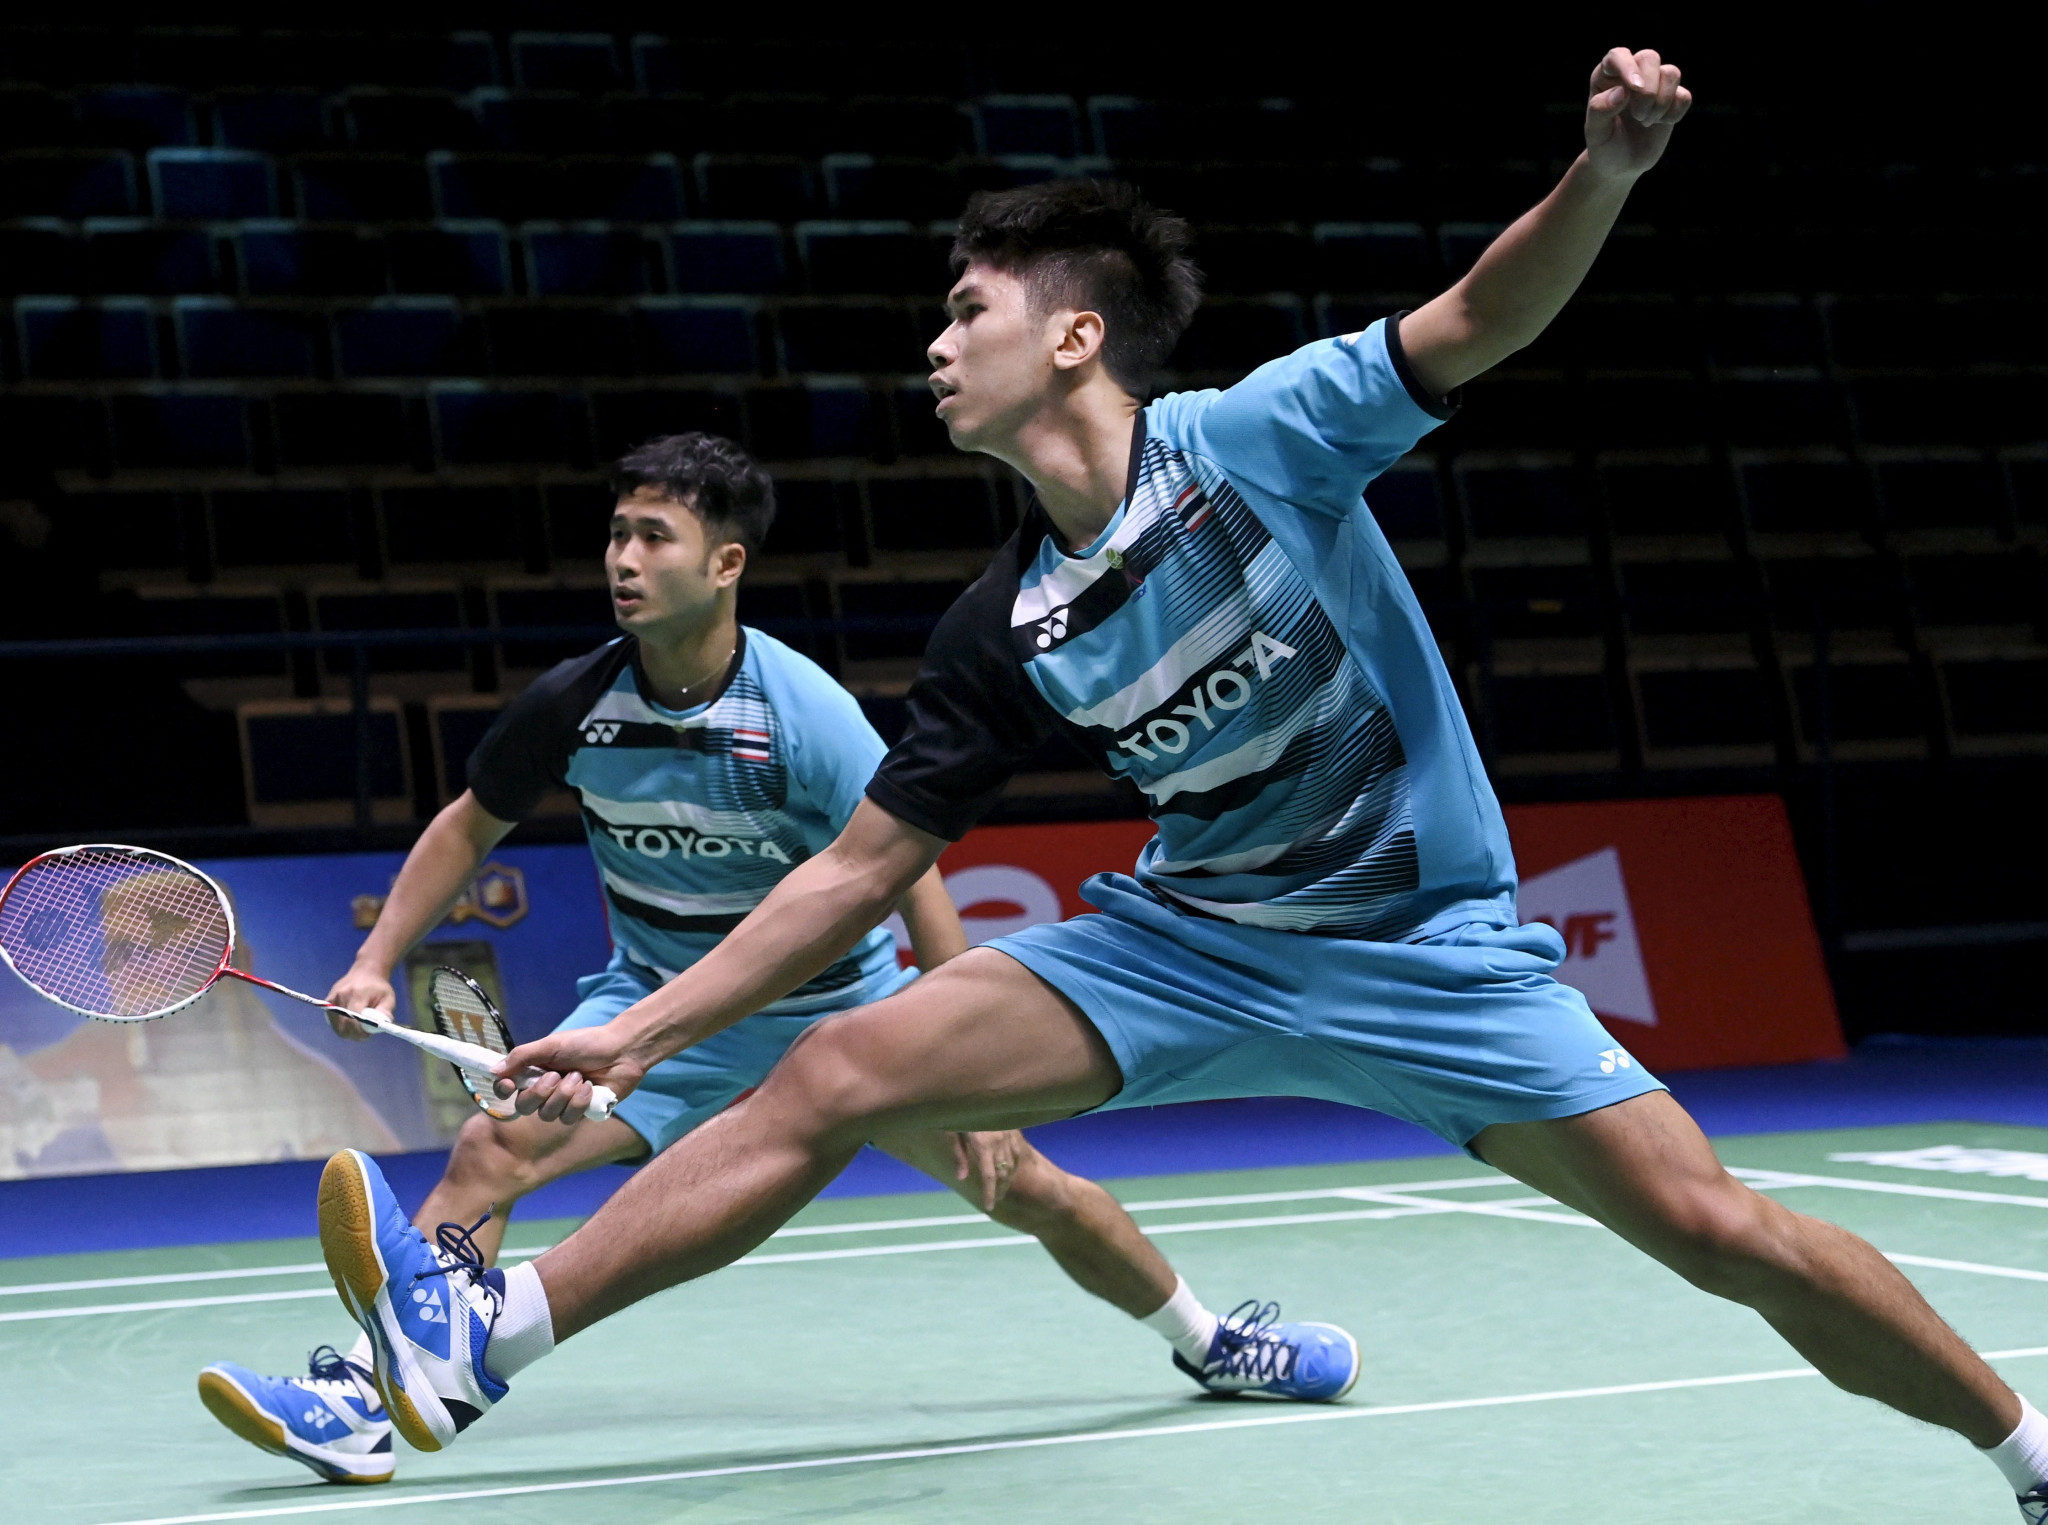 Badminton asia team championships 2022 live streaming